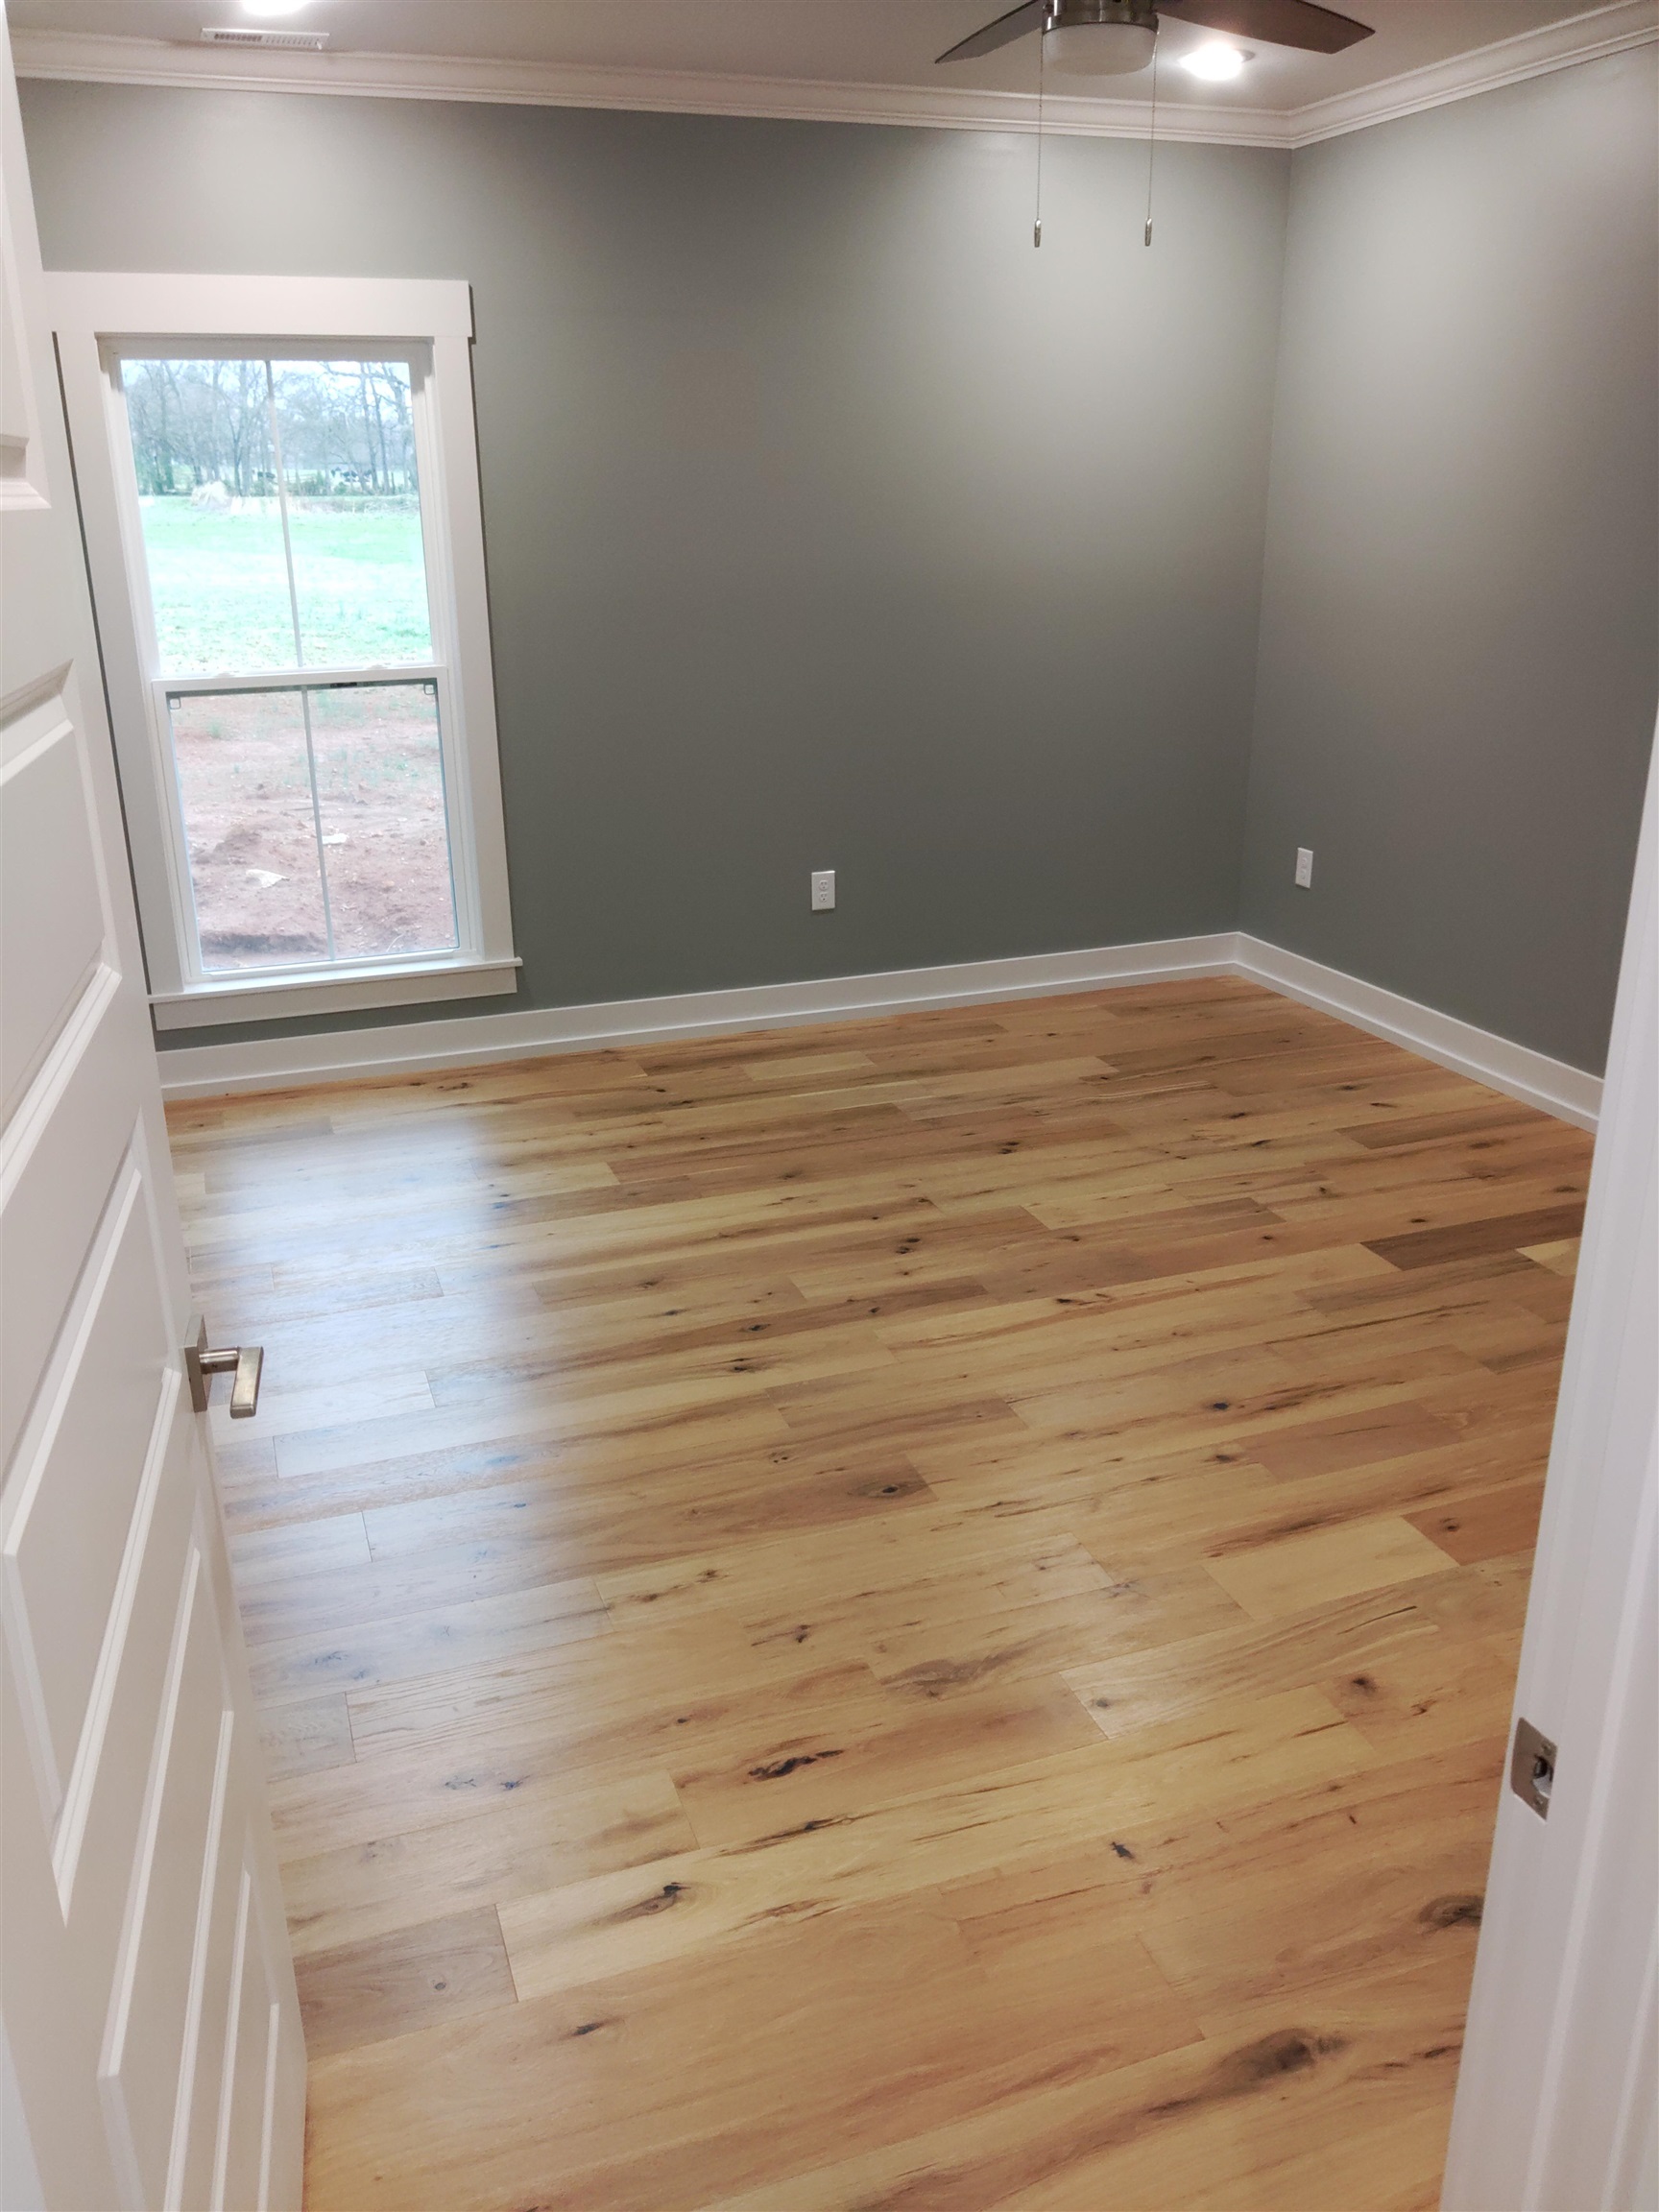 wood flooring through-out